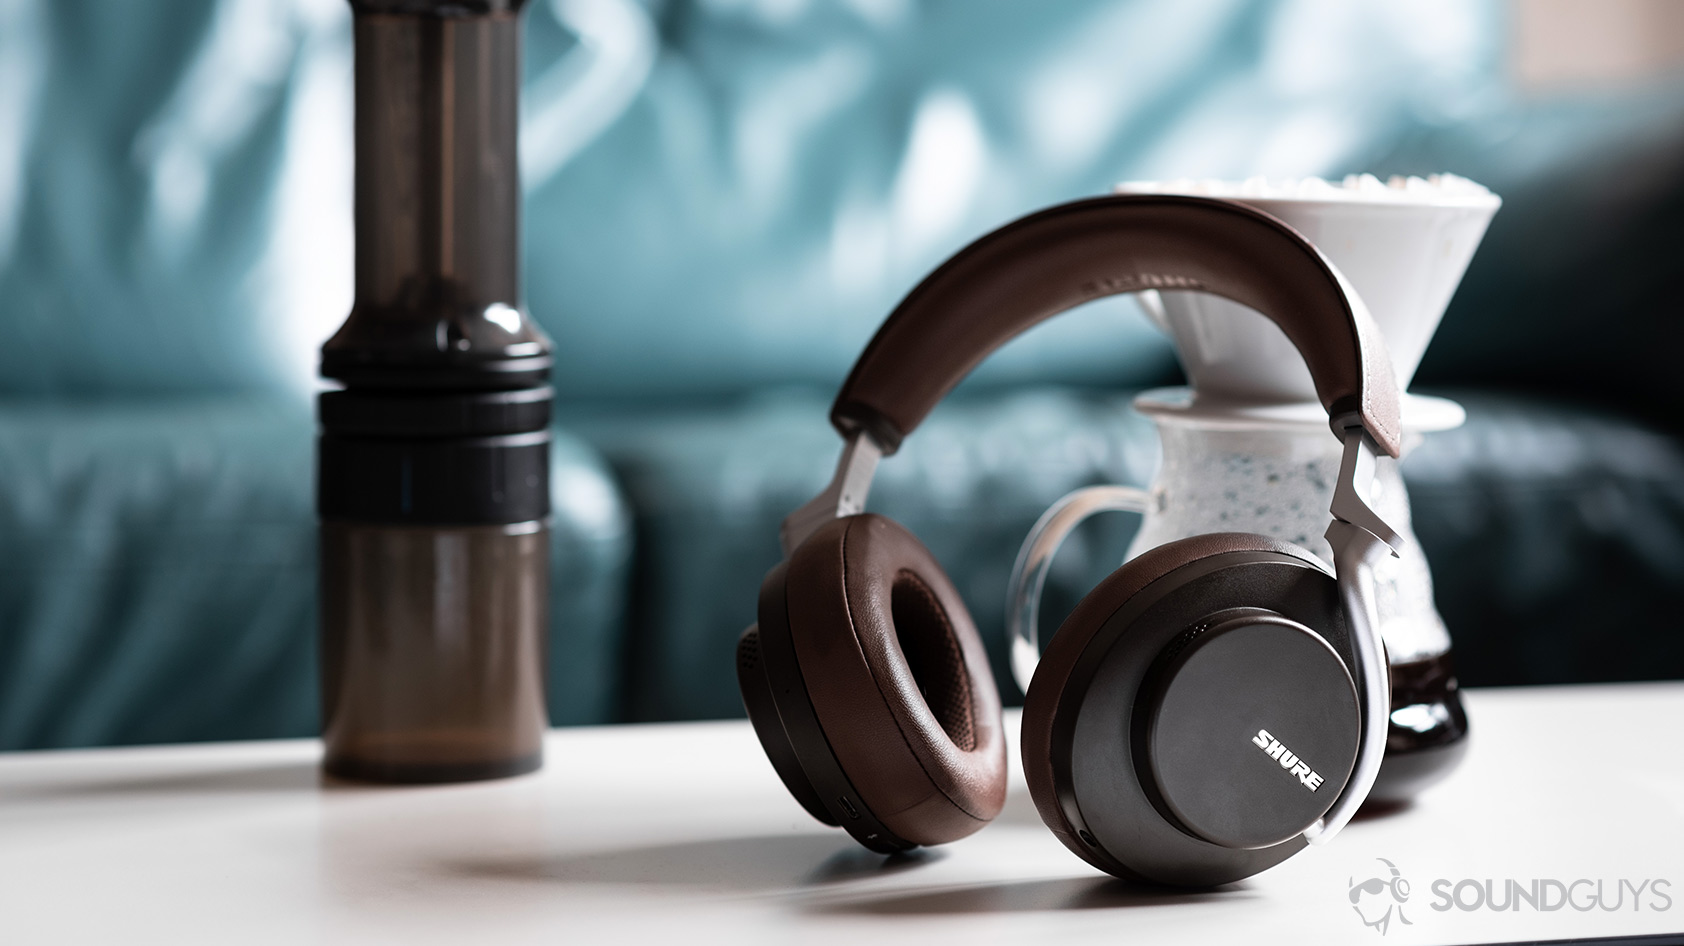 The Shure AONIC 50 noise canceling headphones in brown leaning against a coffee carafe.